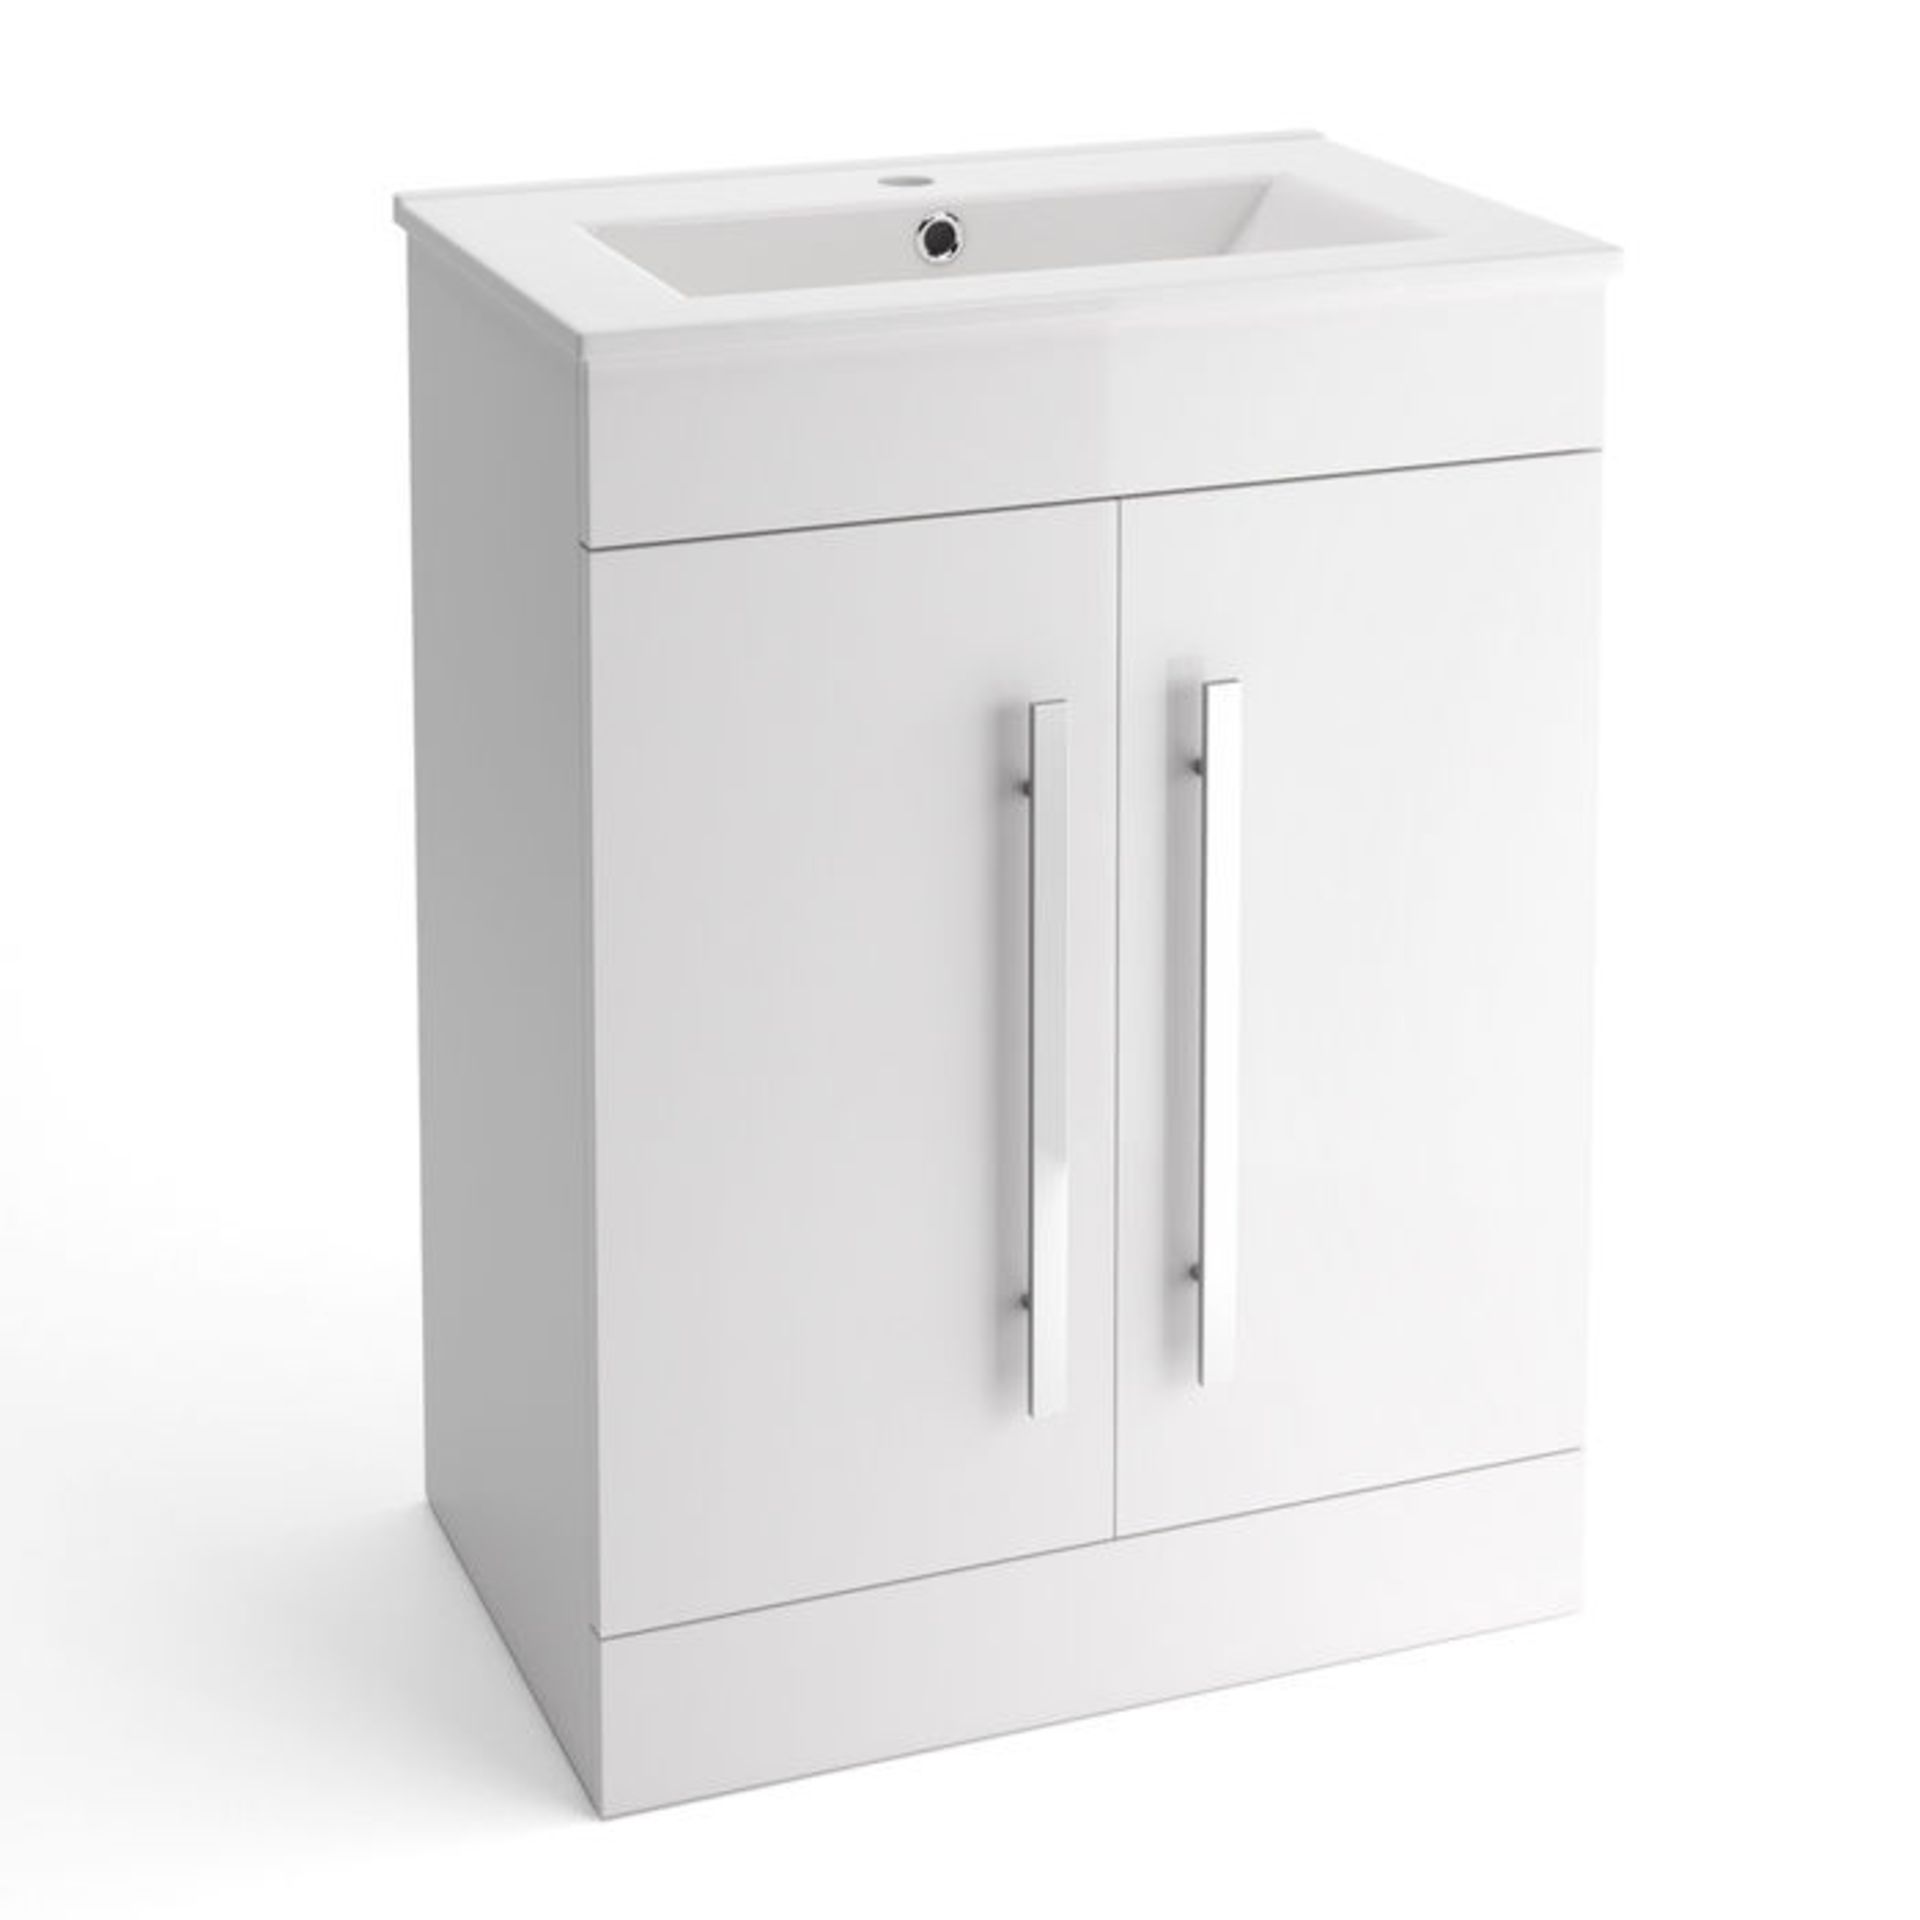 (A67) 600mm Avon High Gloss White Sink Cabinet - Floor Standing. Comes complete with basin. Re... - Image 4 of 5